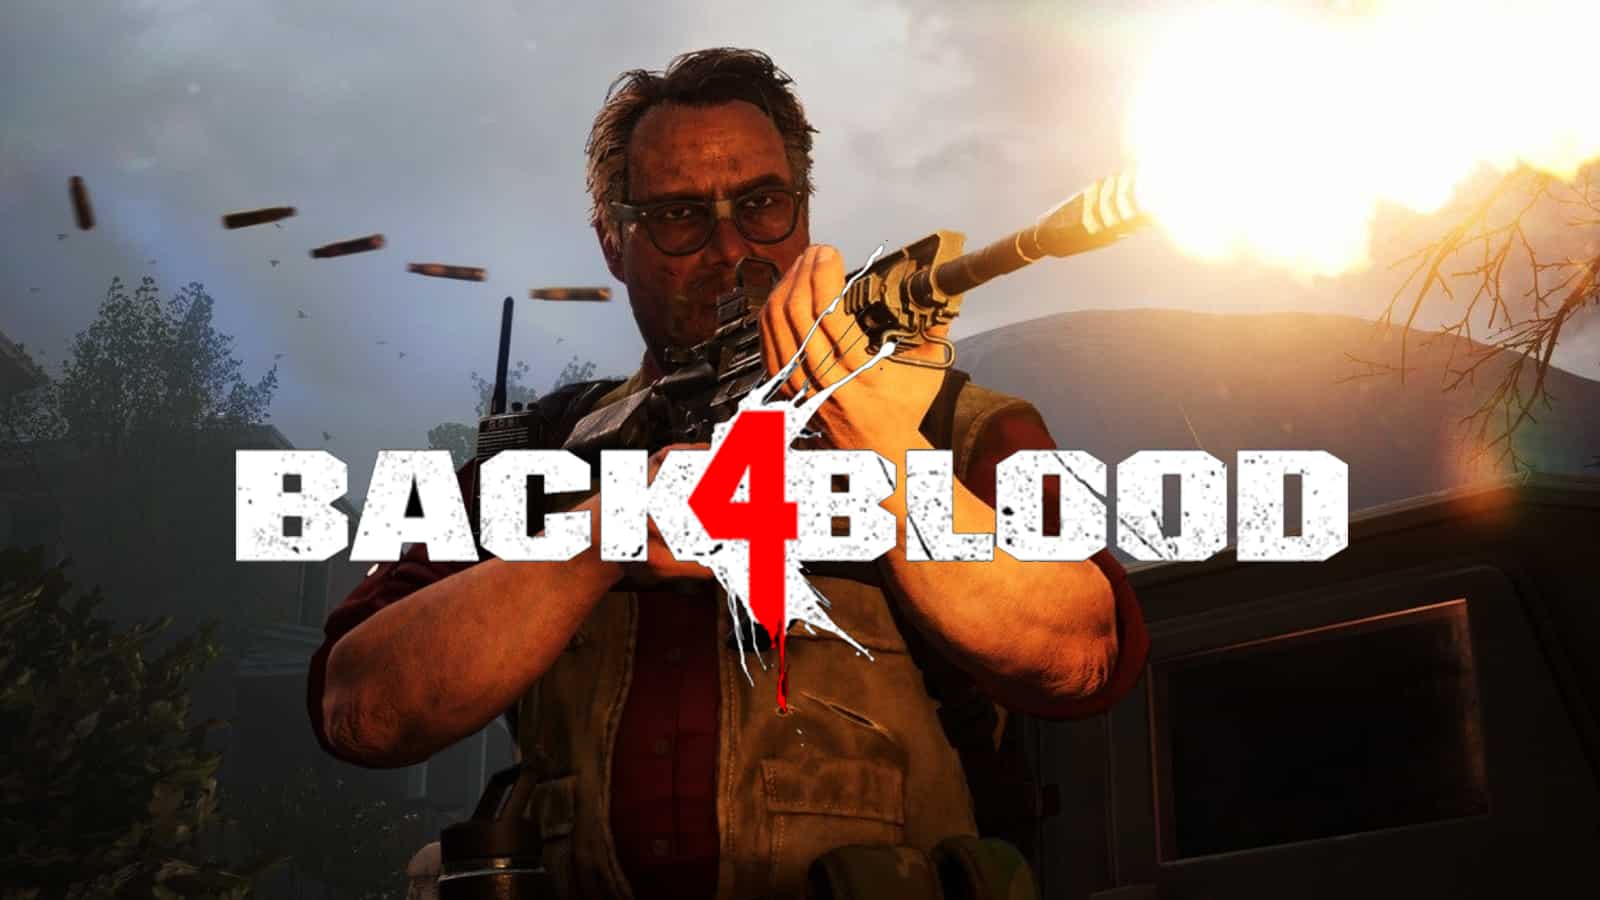 Back 4 Blood first impressions